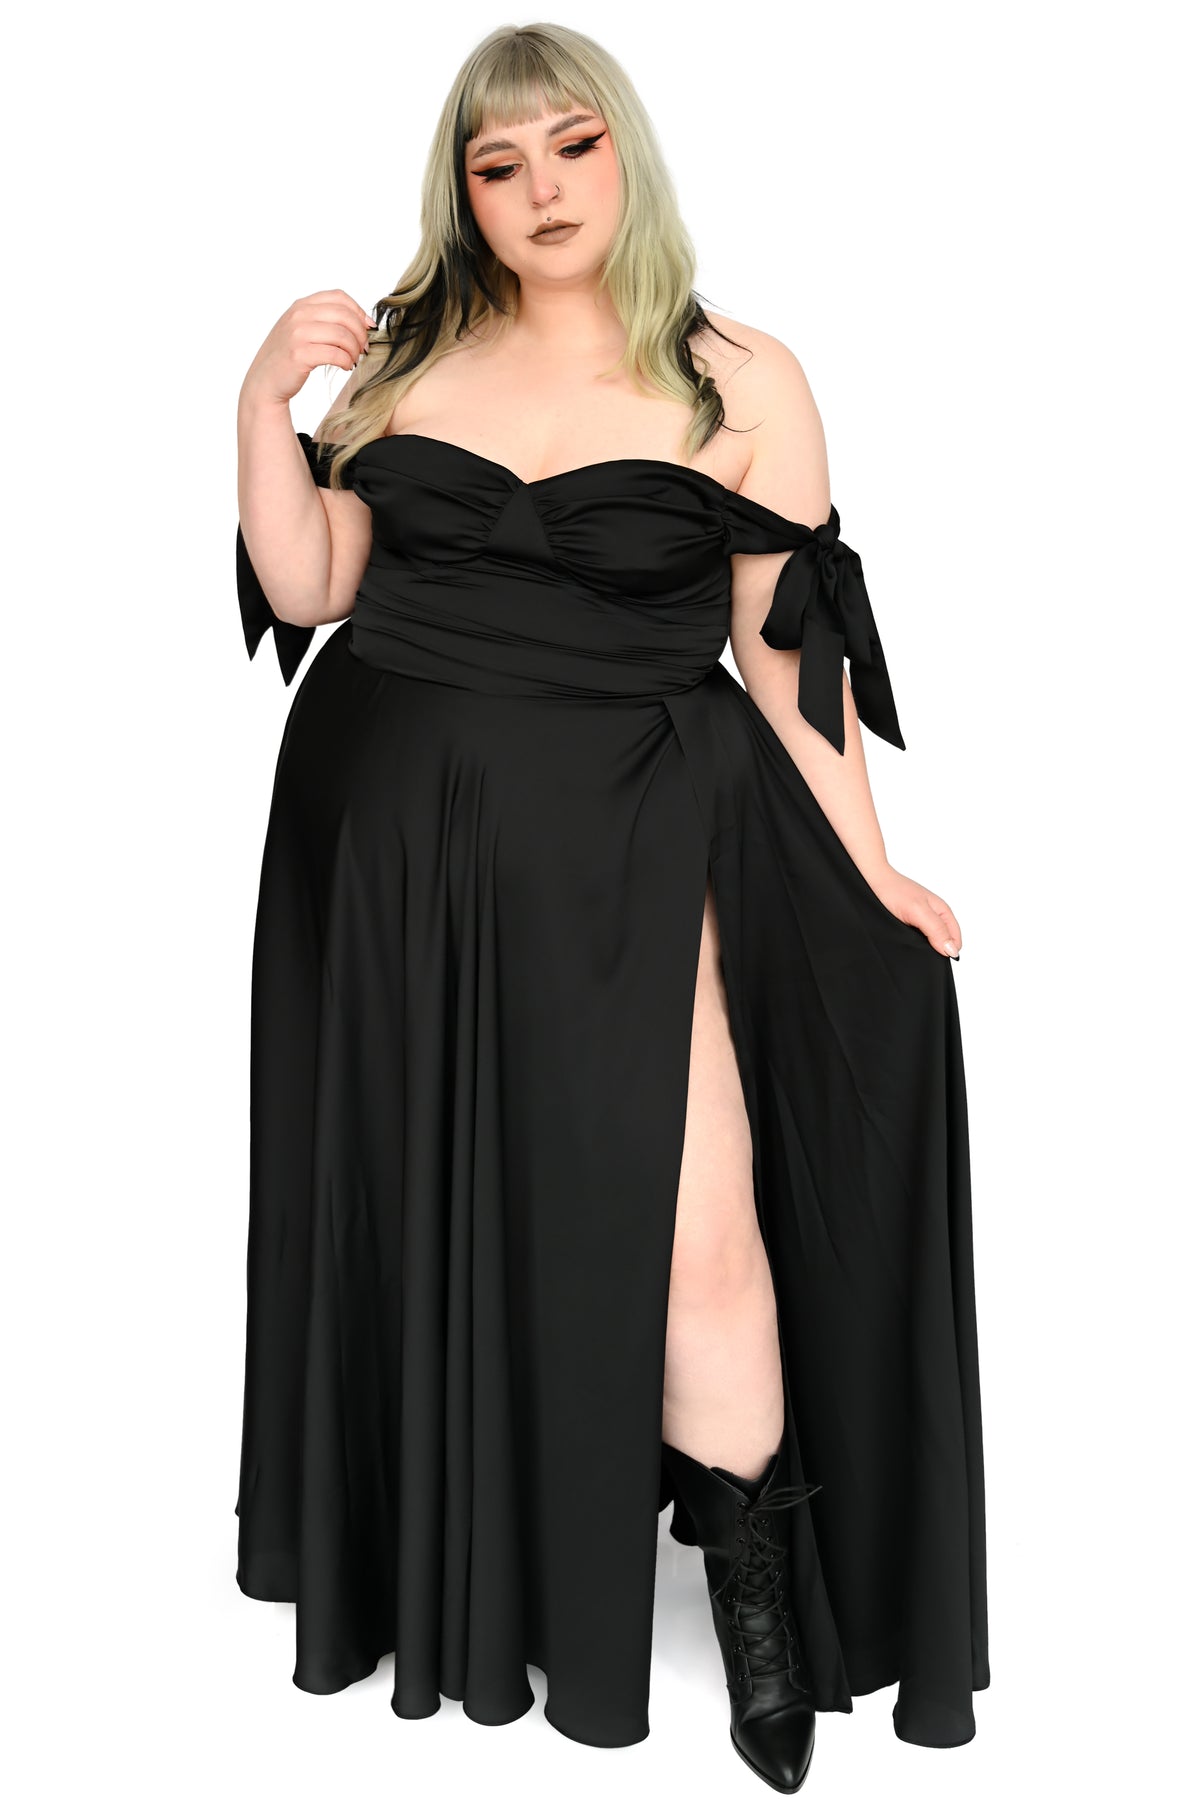 Bad Romance Gown - No Restock! - Last one size 3XL!